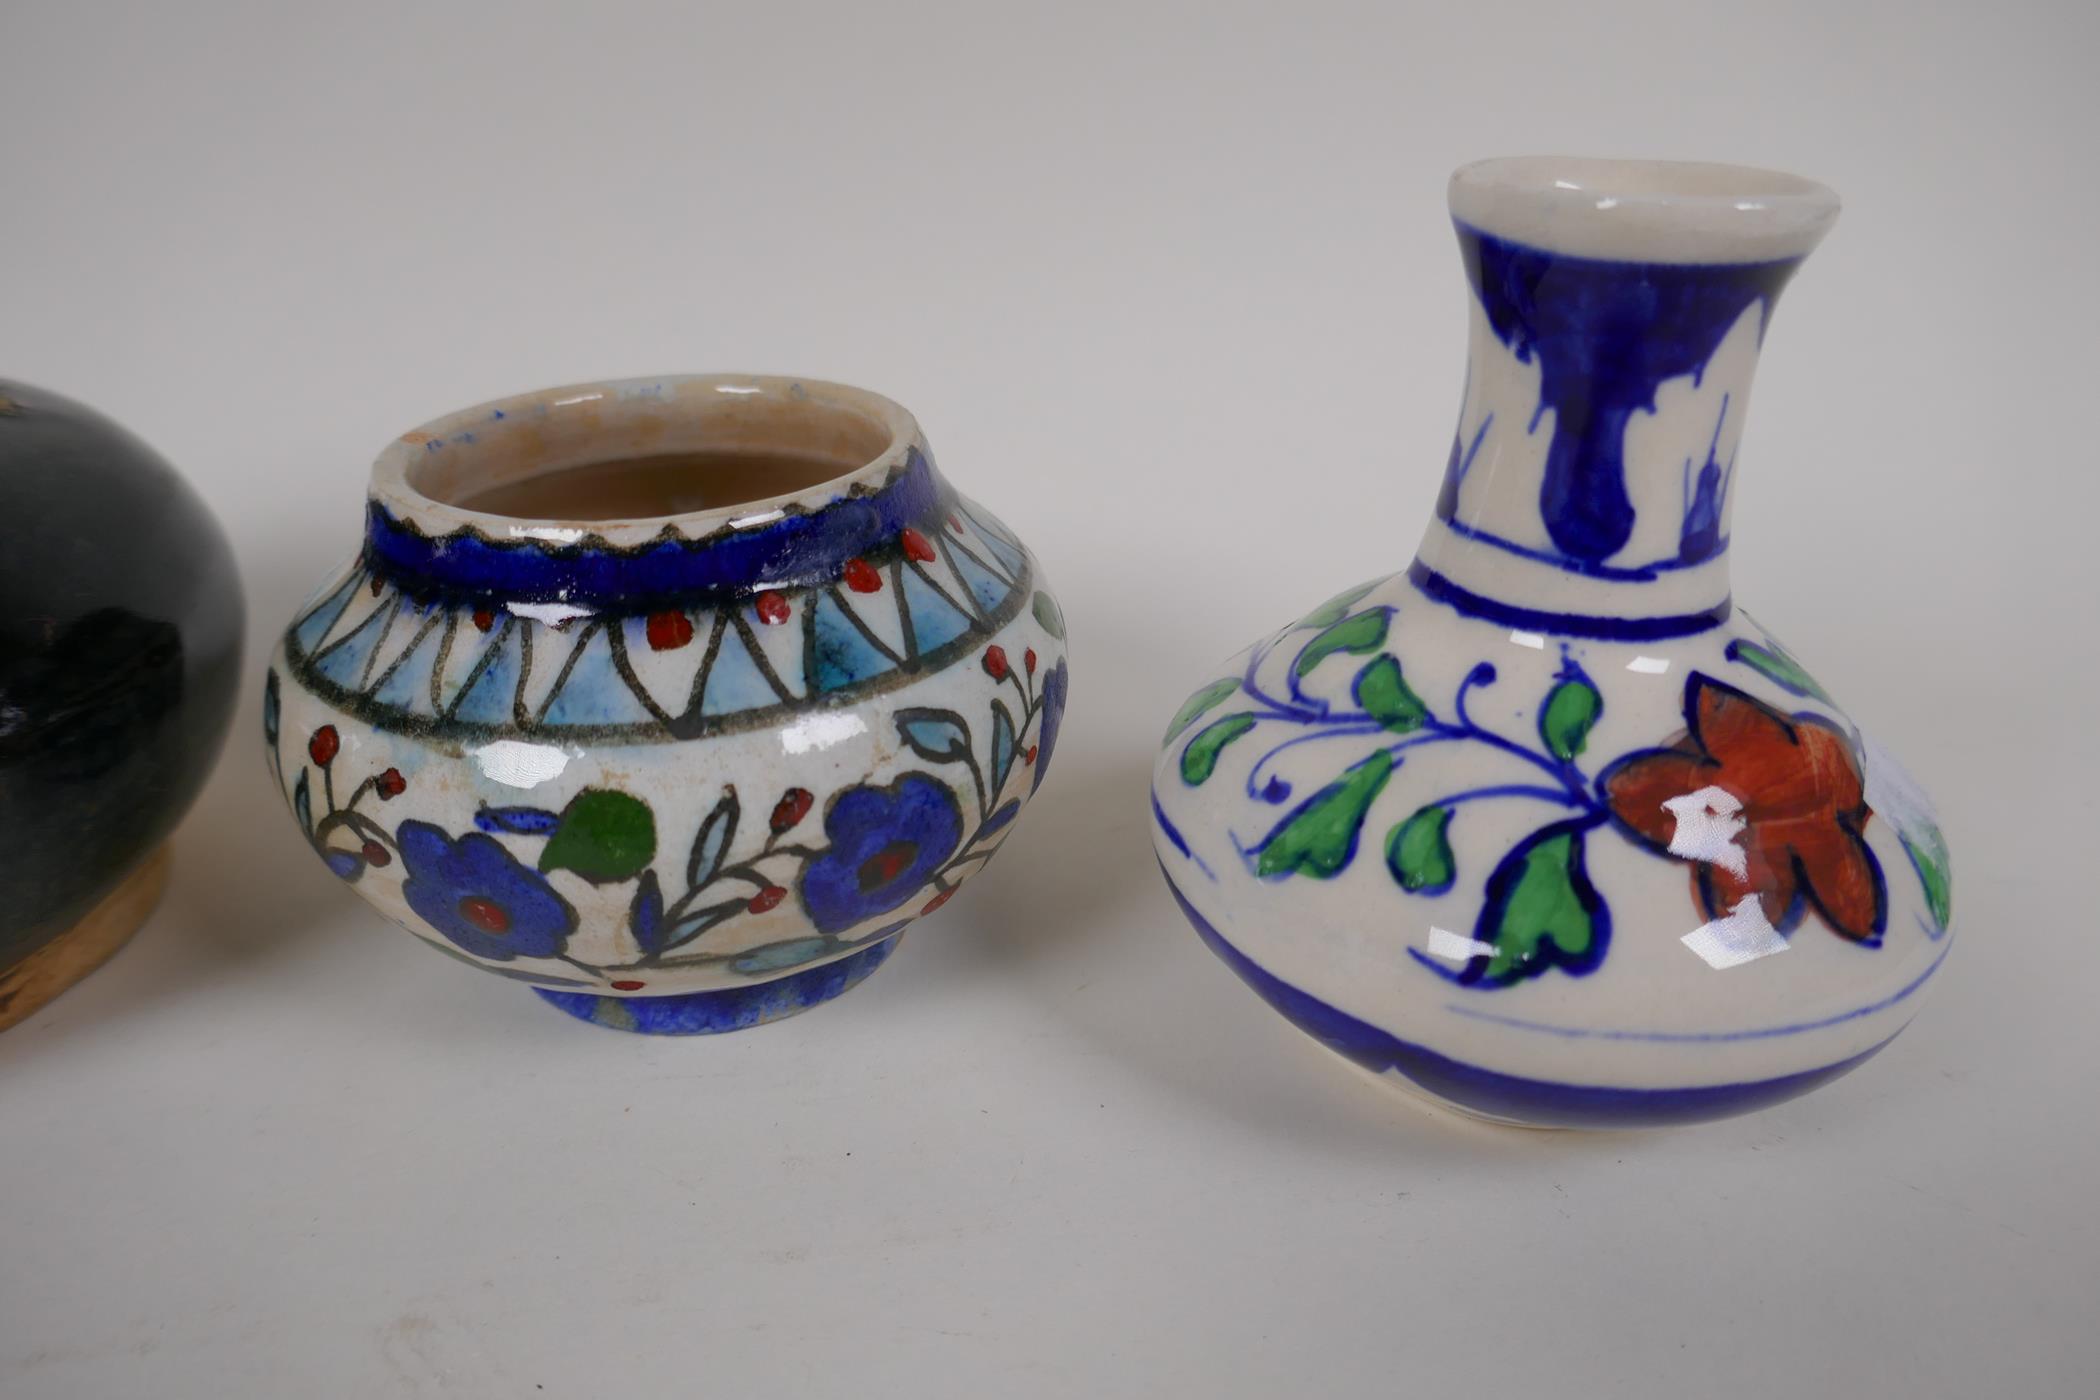 Two Indian pottery squat jars, a similar eastern jar and a vase, 4" high - Image 3 of 6